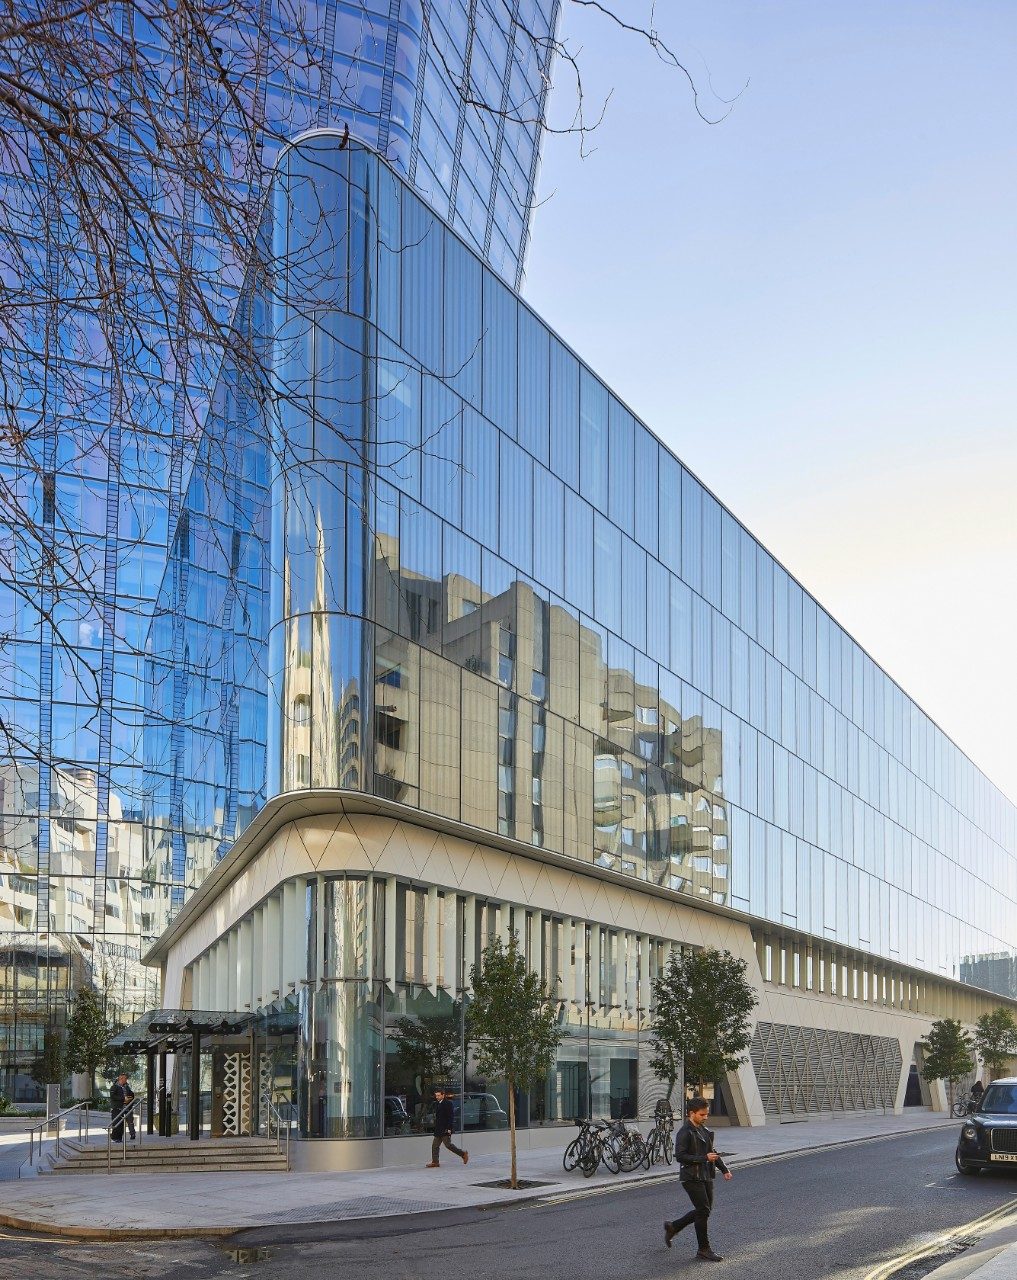 Curved Glass And Bent Glass For Facades And Architectural Buildings Guardian Glass